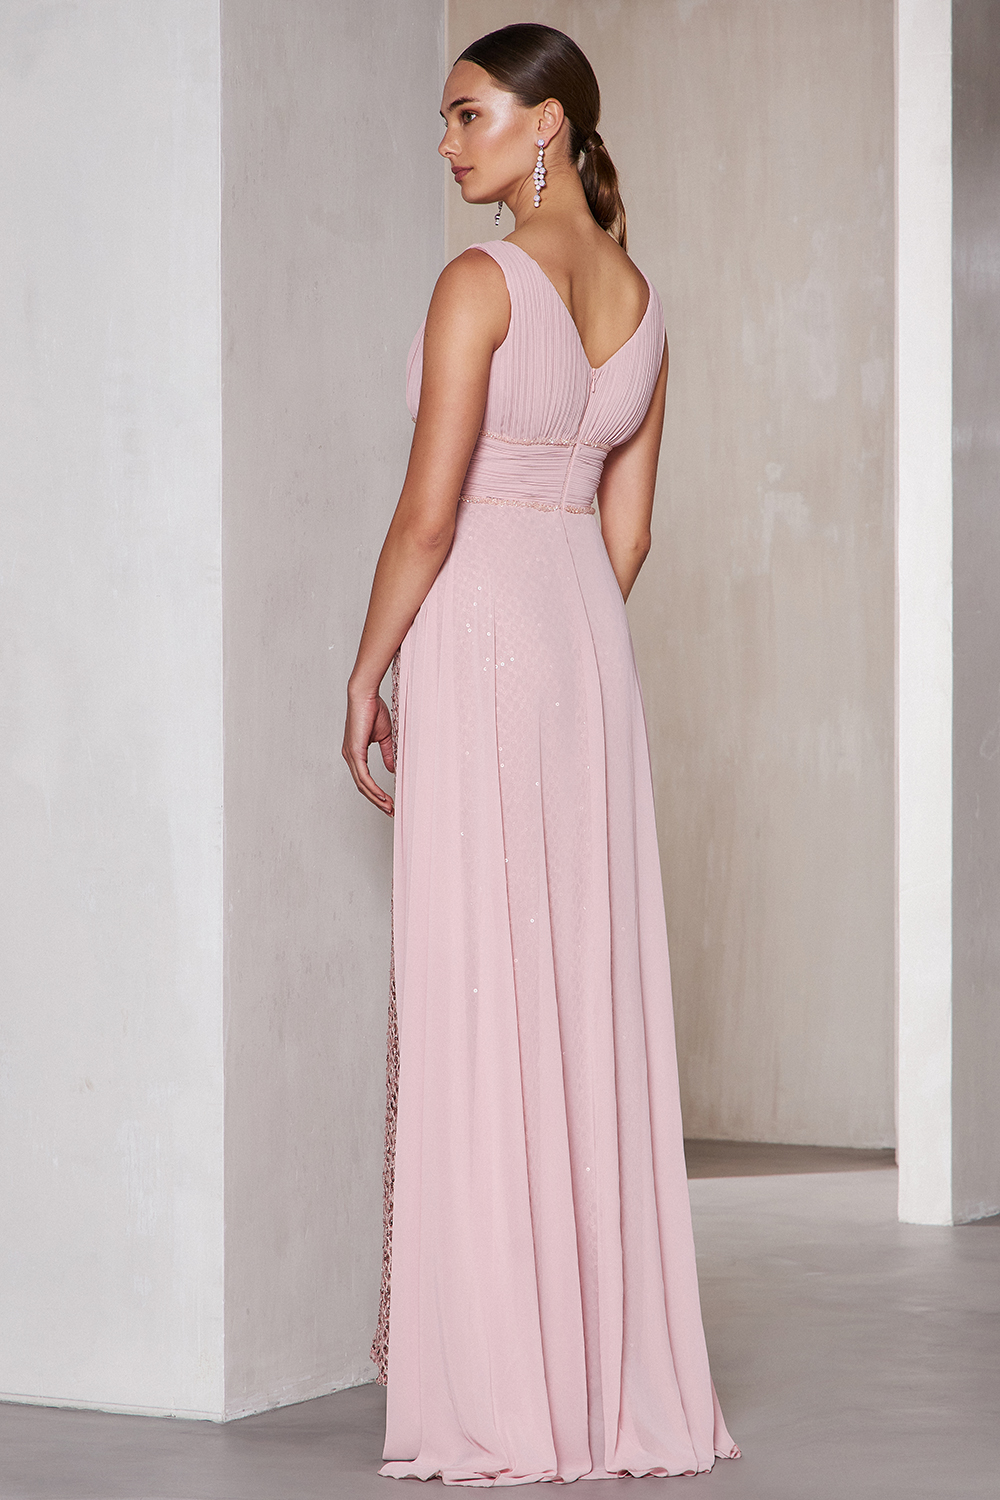 Long evening dress with chiffon fabric and sequences